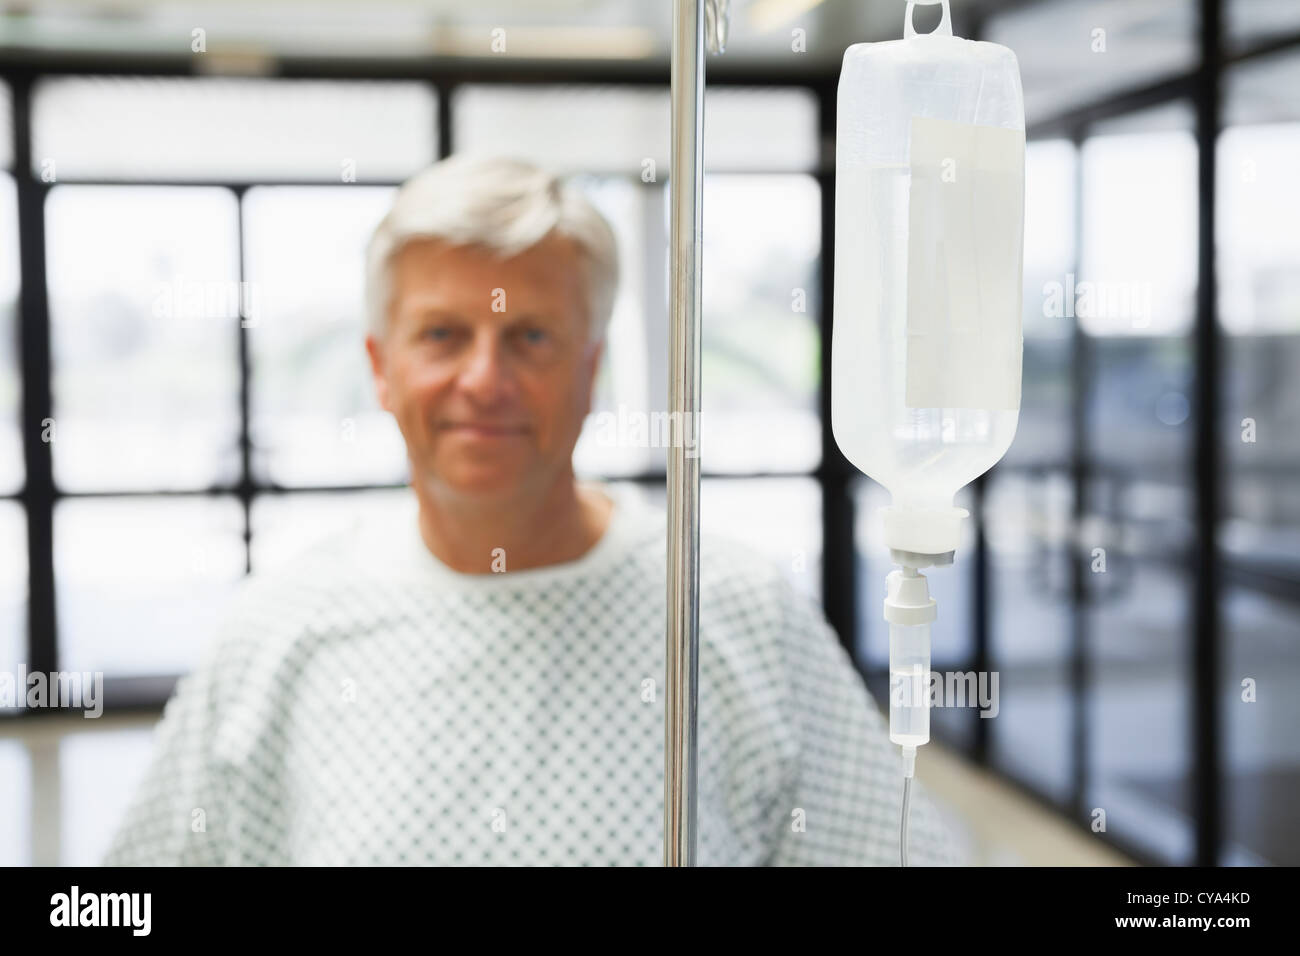 Patient with IV drip smiling Stock Photo